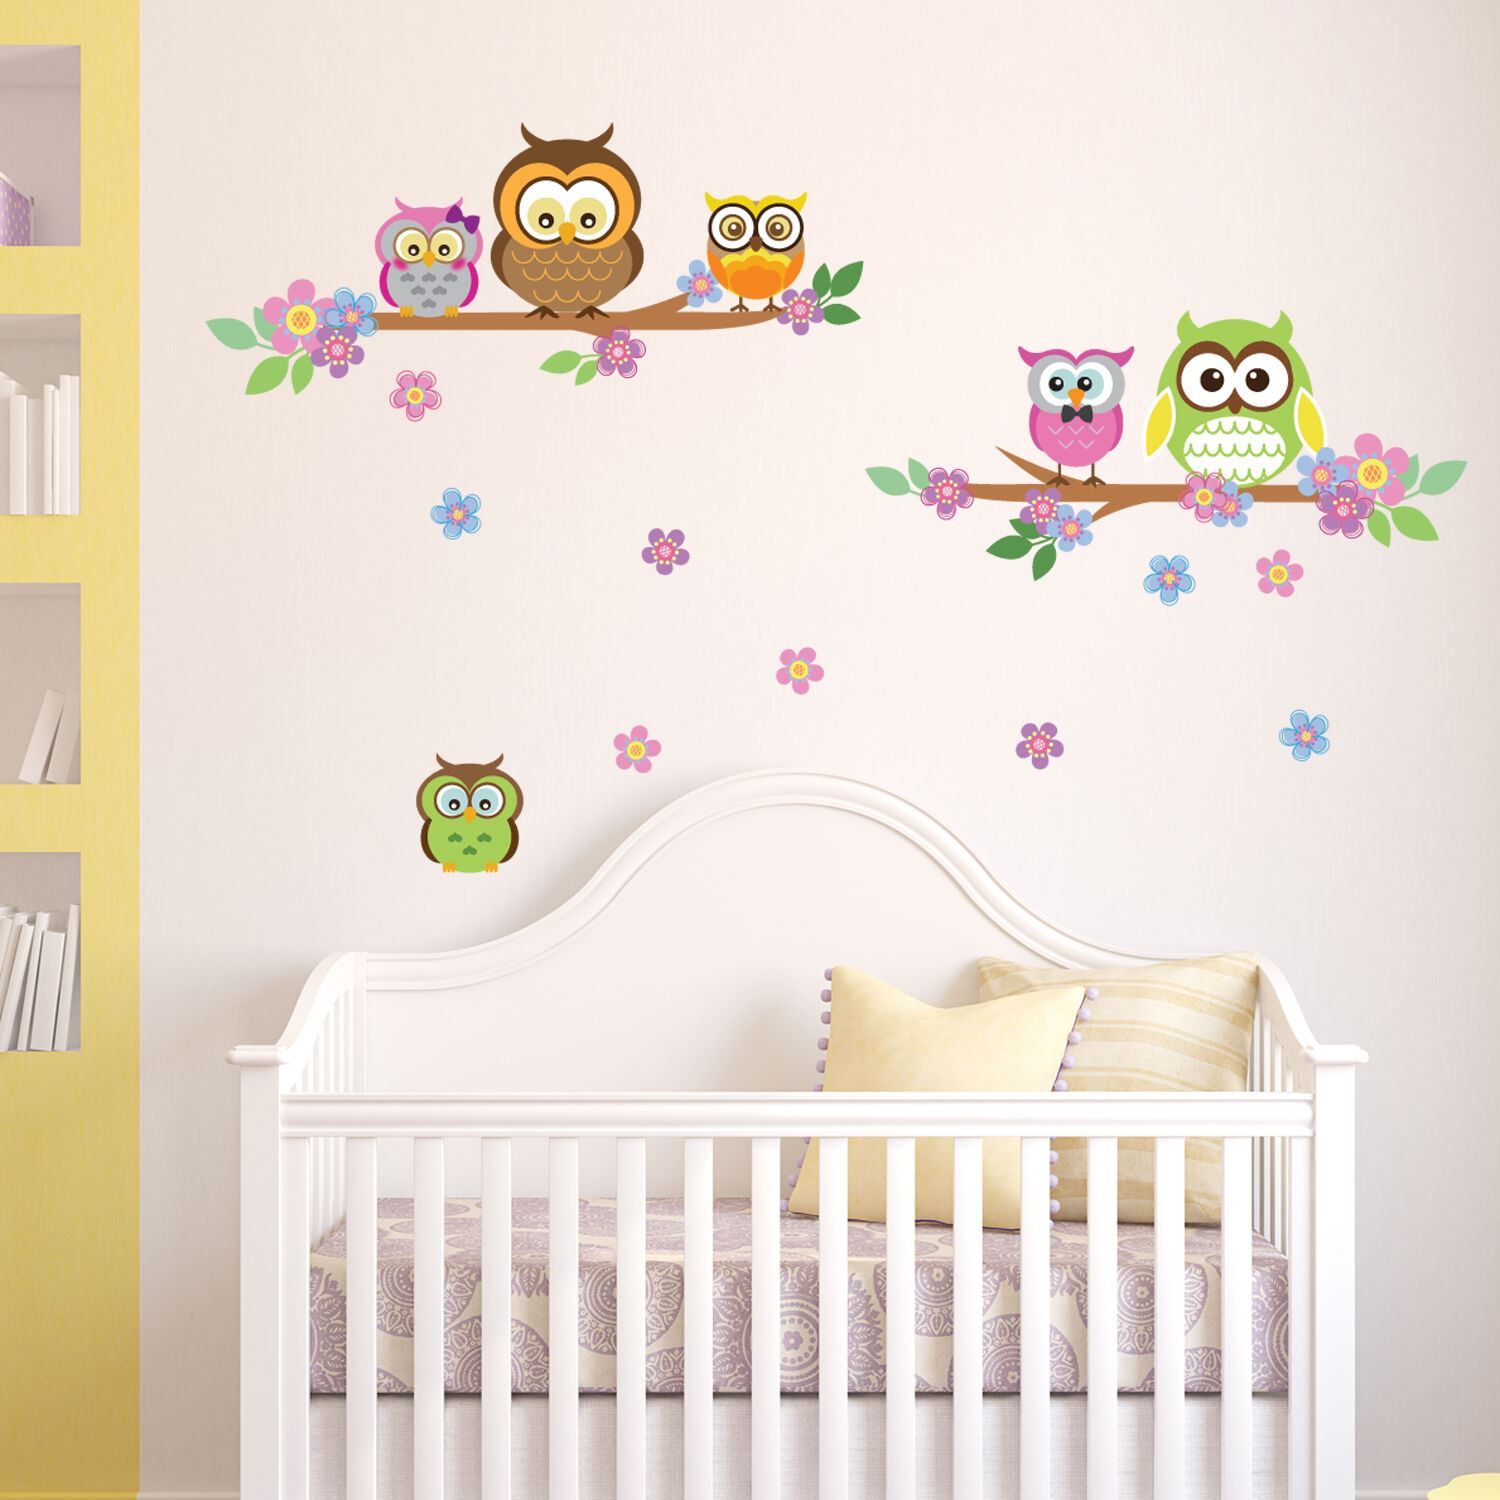 - Transform your room with the stunning Walplus wall sticker collection.
- Walplus' high quality self-adhesive stickers are quick to apply, and can be easily removed and repositioned without damage.
- Simply peel and stick to any smooth, even surface. Application instructions included; Eco-friendly materials and Non-toxic.
- The product size measures at 60cm x 30cm. The finished product can achieve 100cm Wide x 60cm High